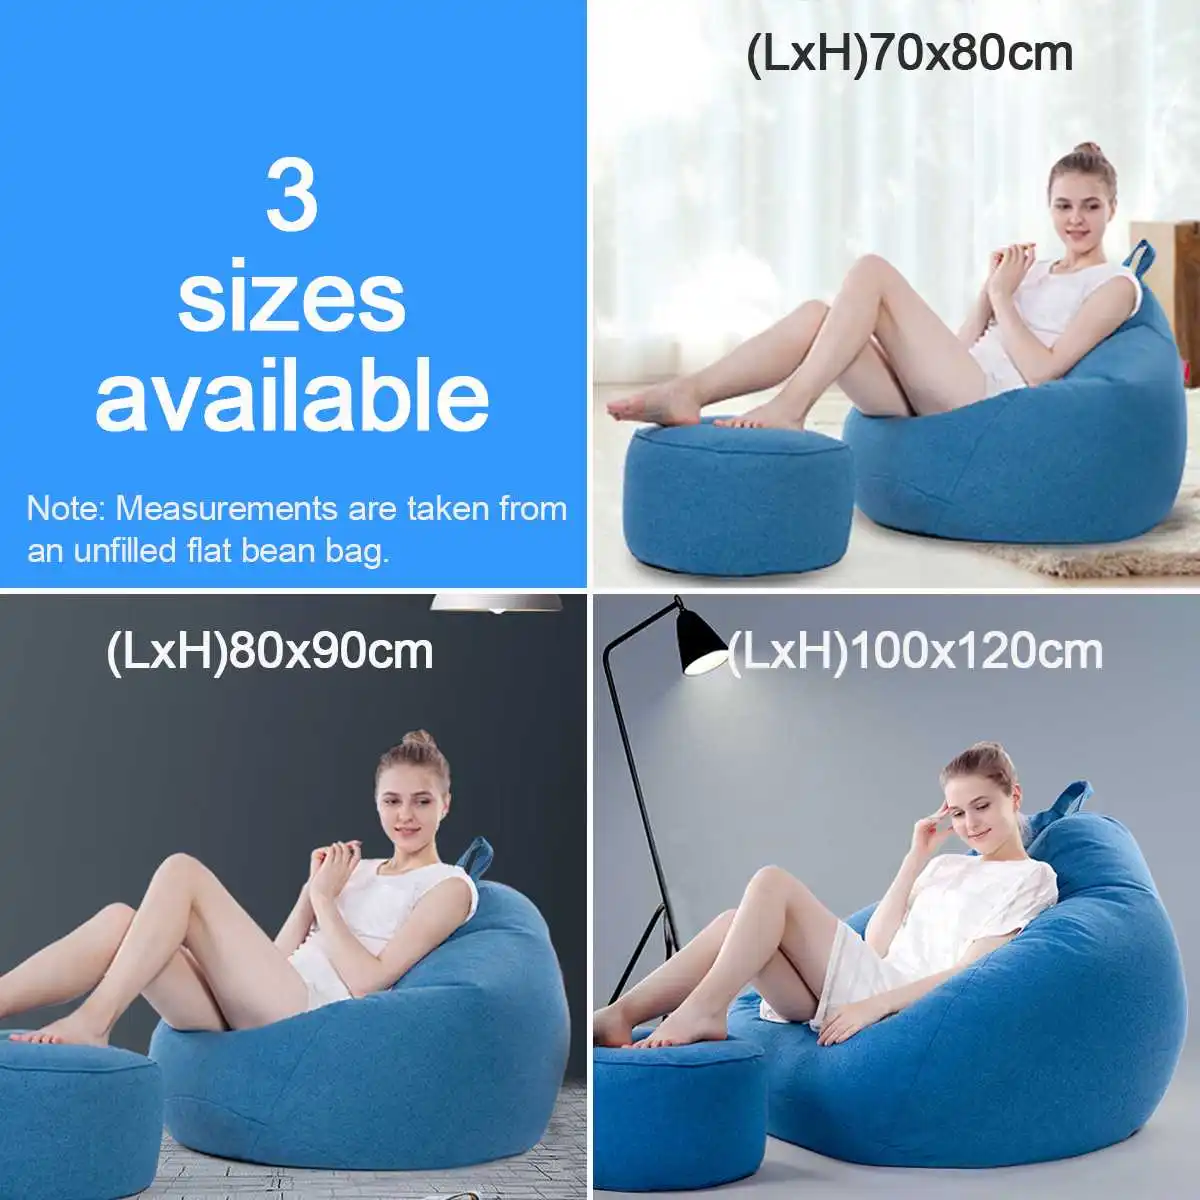 Lazy Beanbag Sofas Cover Chairs Without Filler Linen Cloth Lounger Seat Bean Bag Pouf Puff Couch Tatami Living Room Furniture Bean Bag Sofas Aliexpress